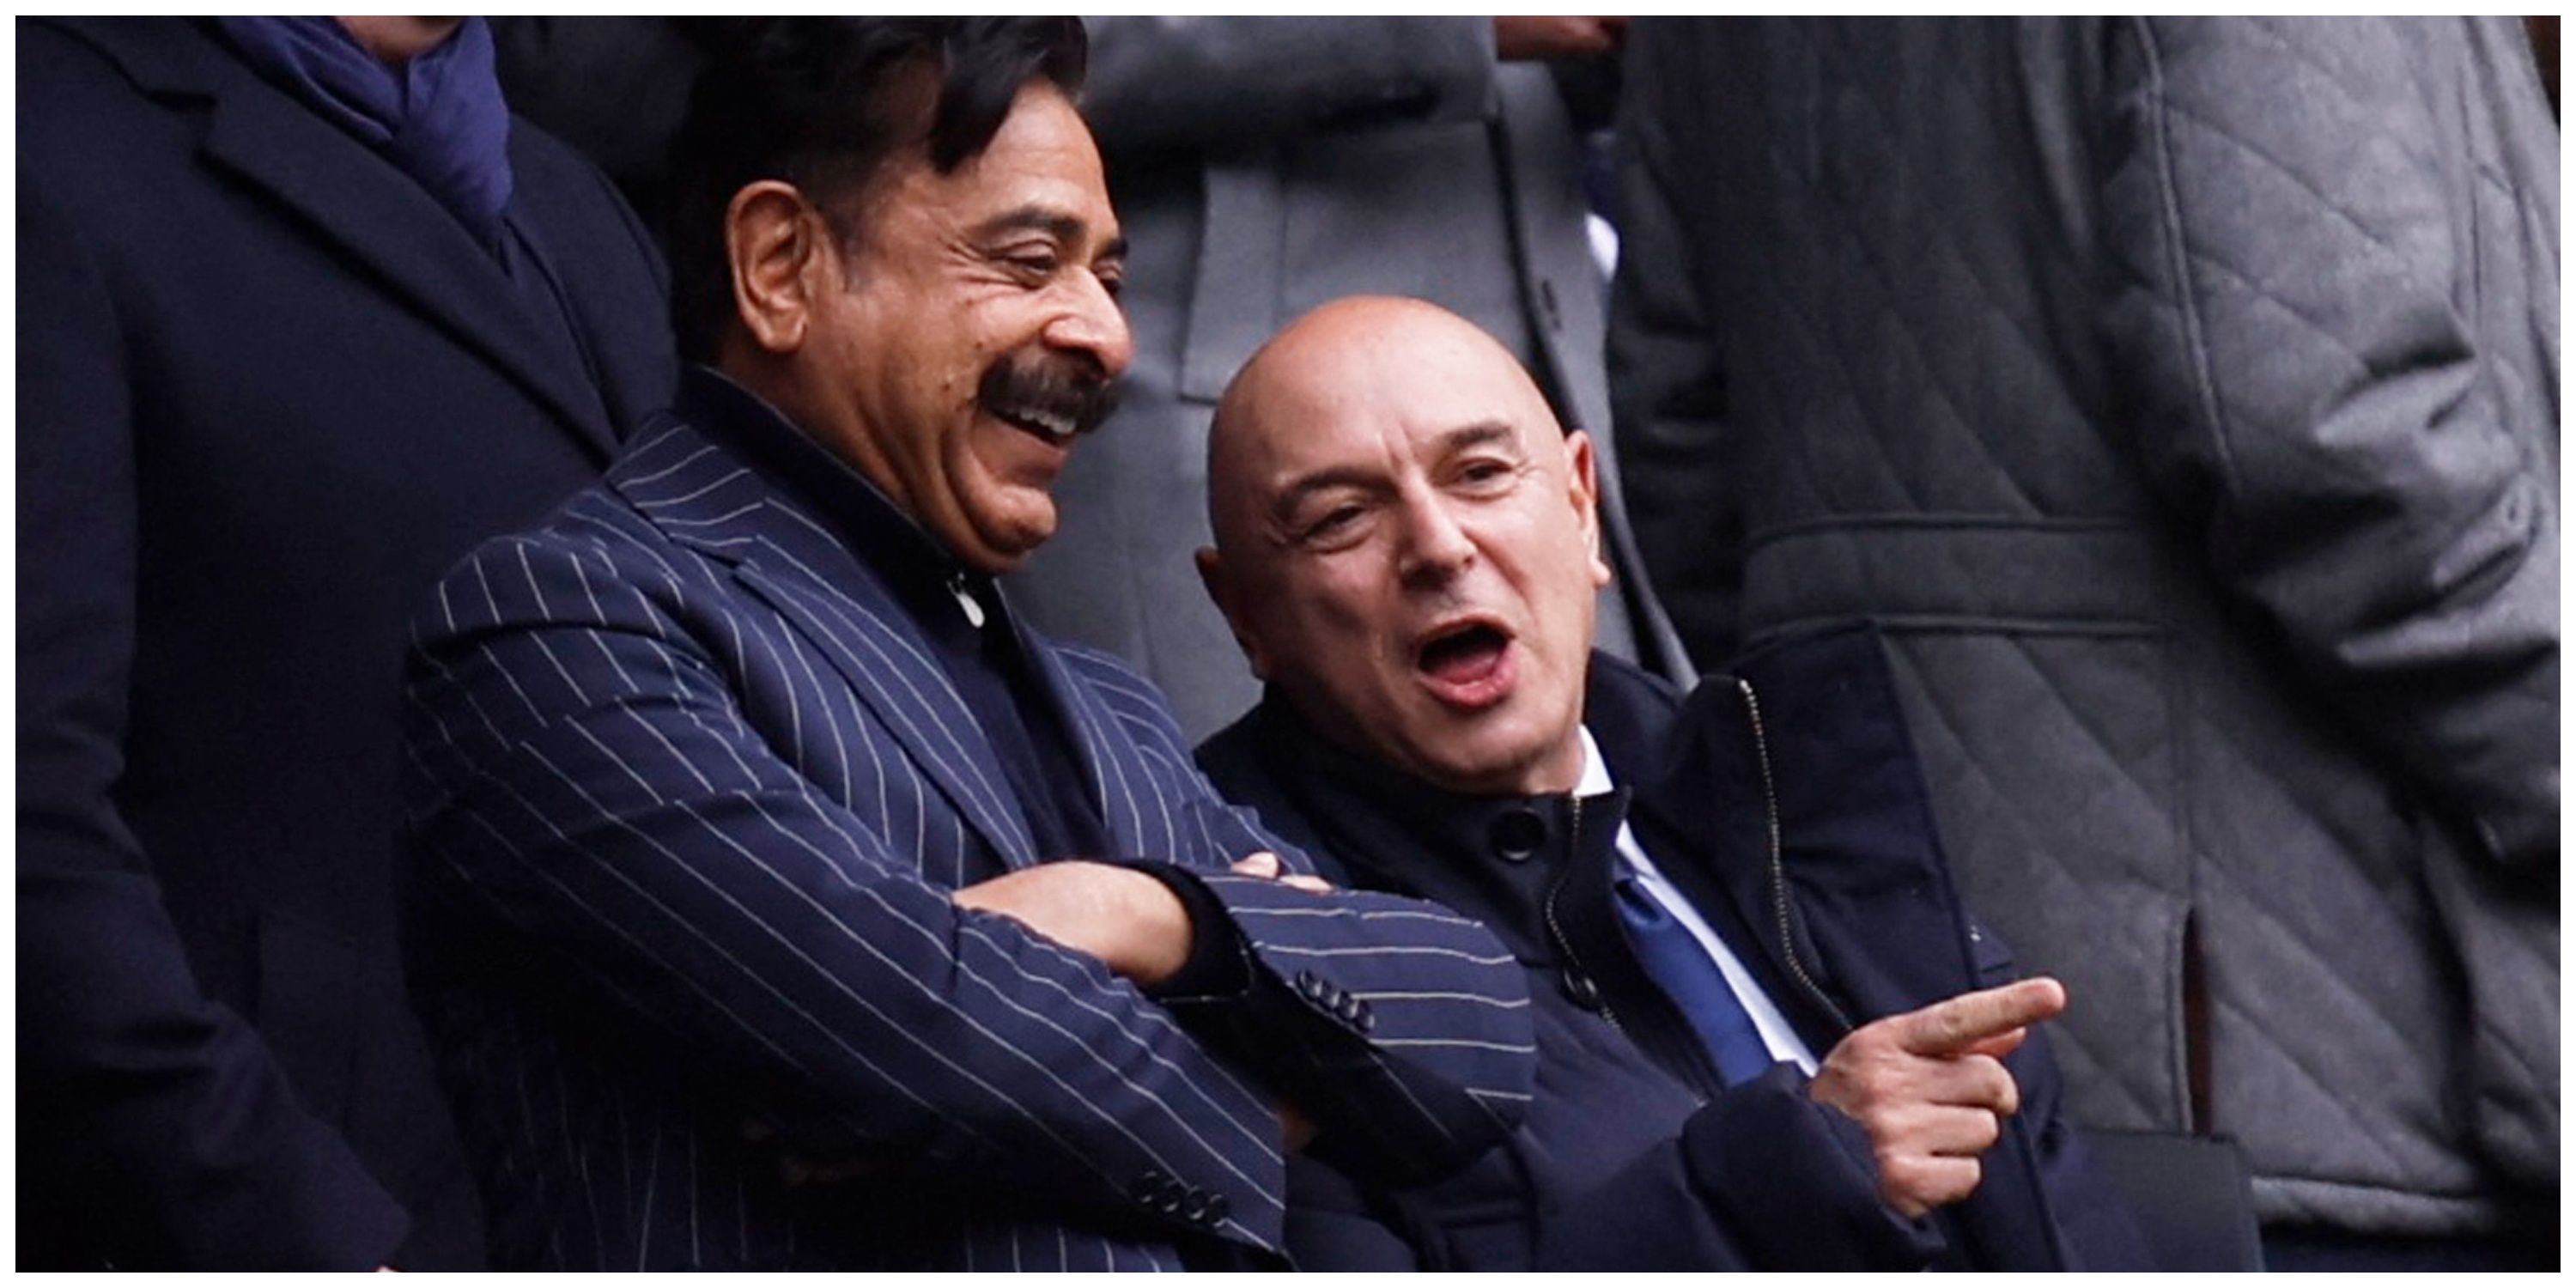 Fulham owner Shahid Khan and Tottenham chairman Daniel Levy joking about